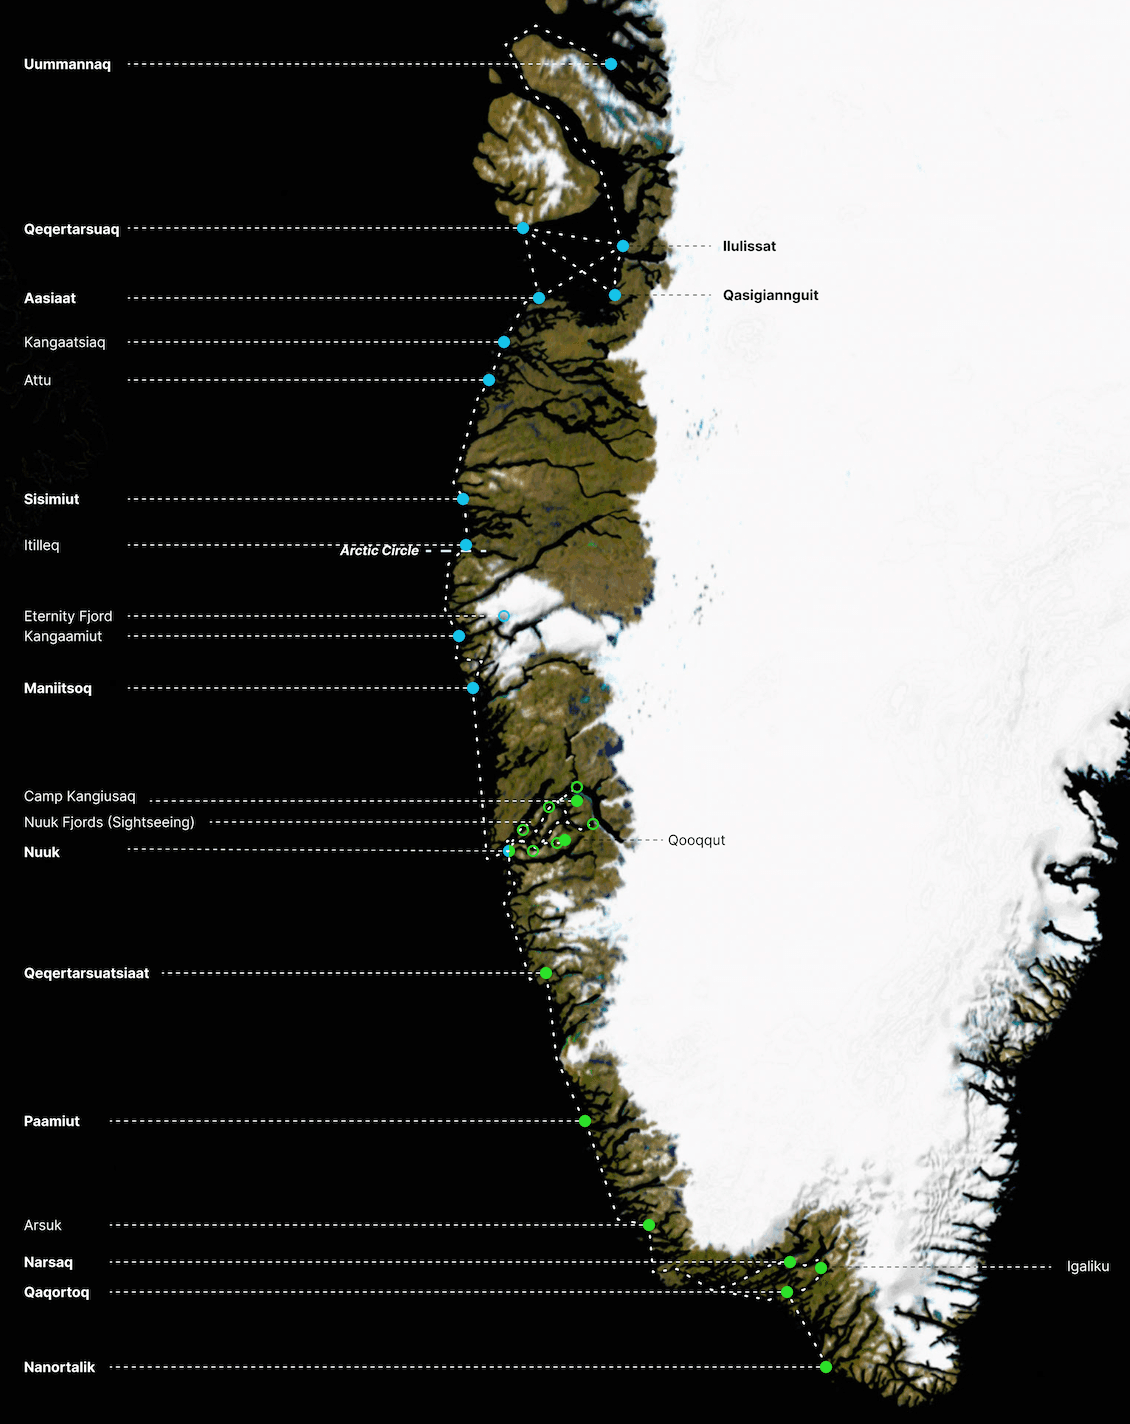 The Full Greenland Voyage map